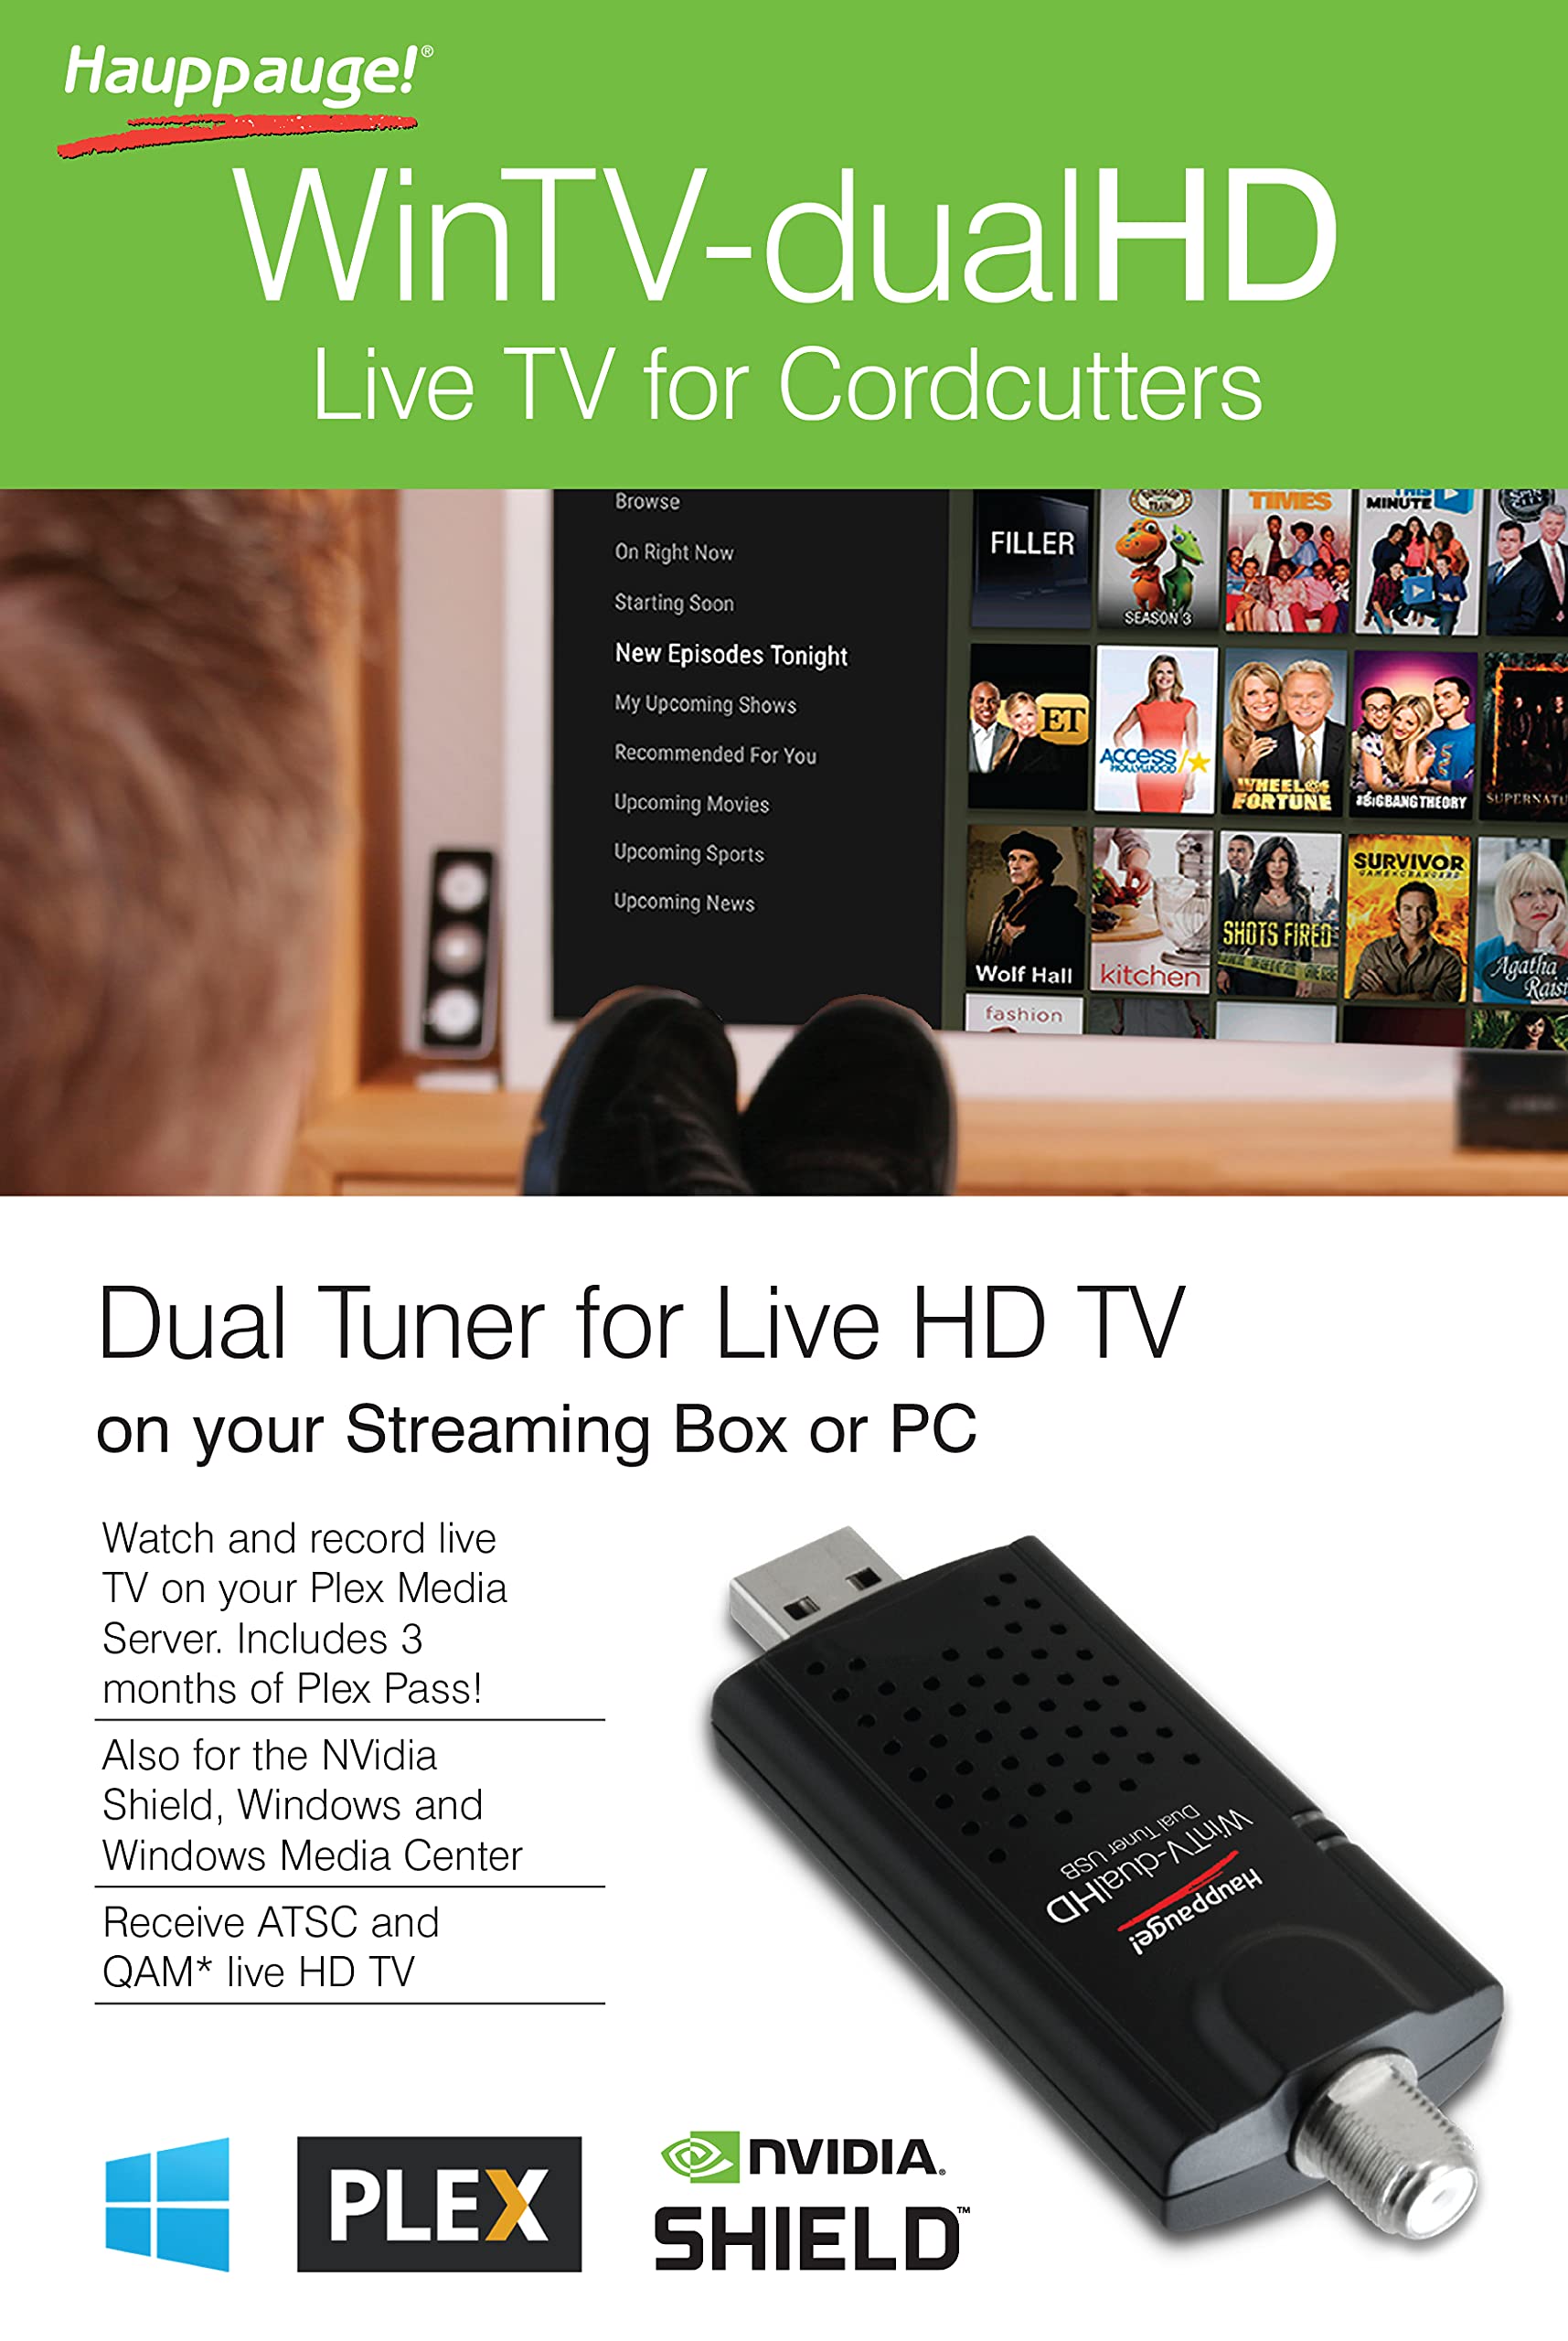 Hauppauge 1657 WinTV-dualHD Cordcutter Dual USB 2.0 TV Tuner for Nvidia Shield and Windows PC